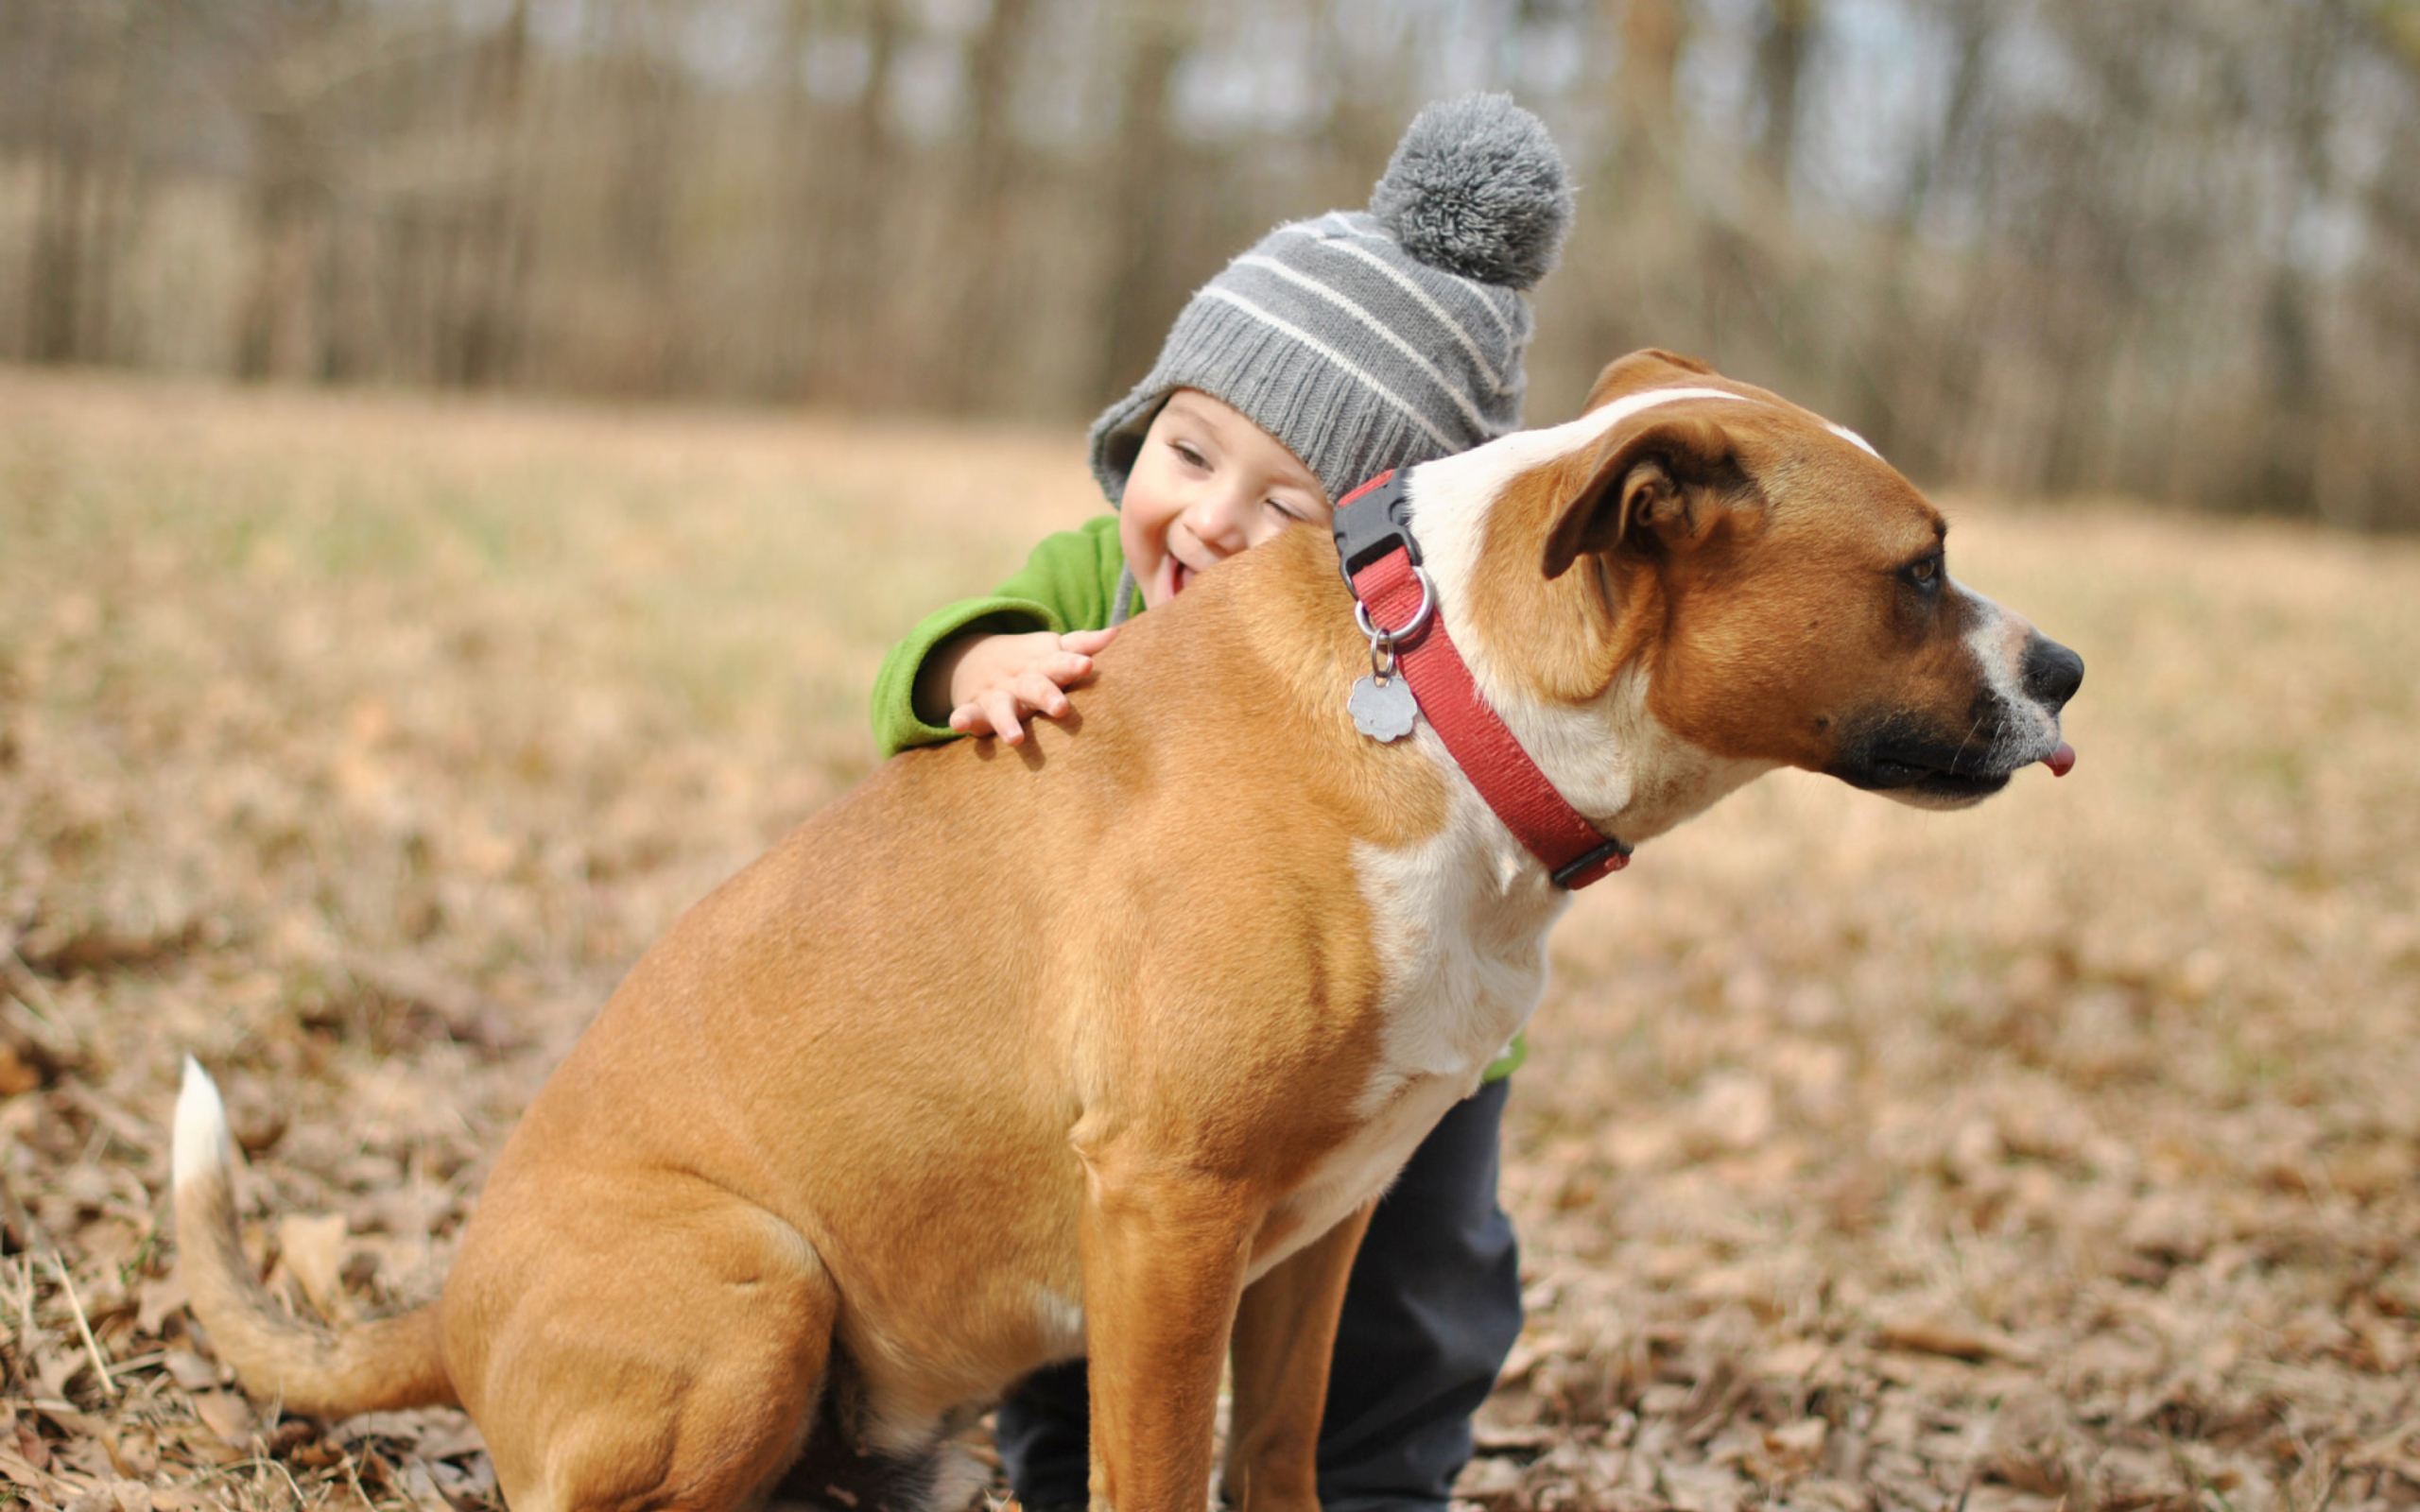 Child With His Dog Friend wallpaper 2560x1600